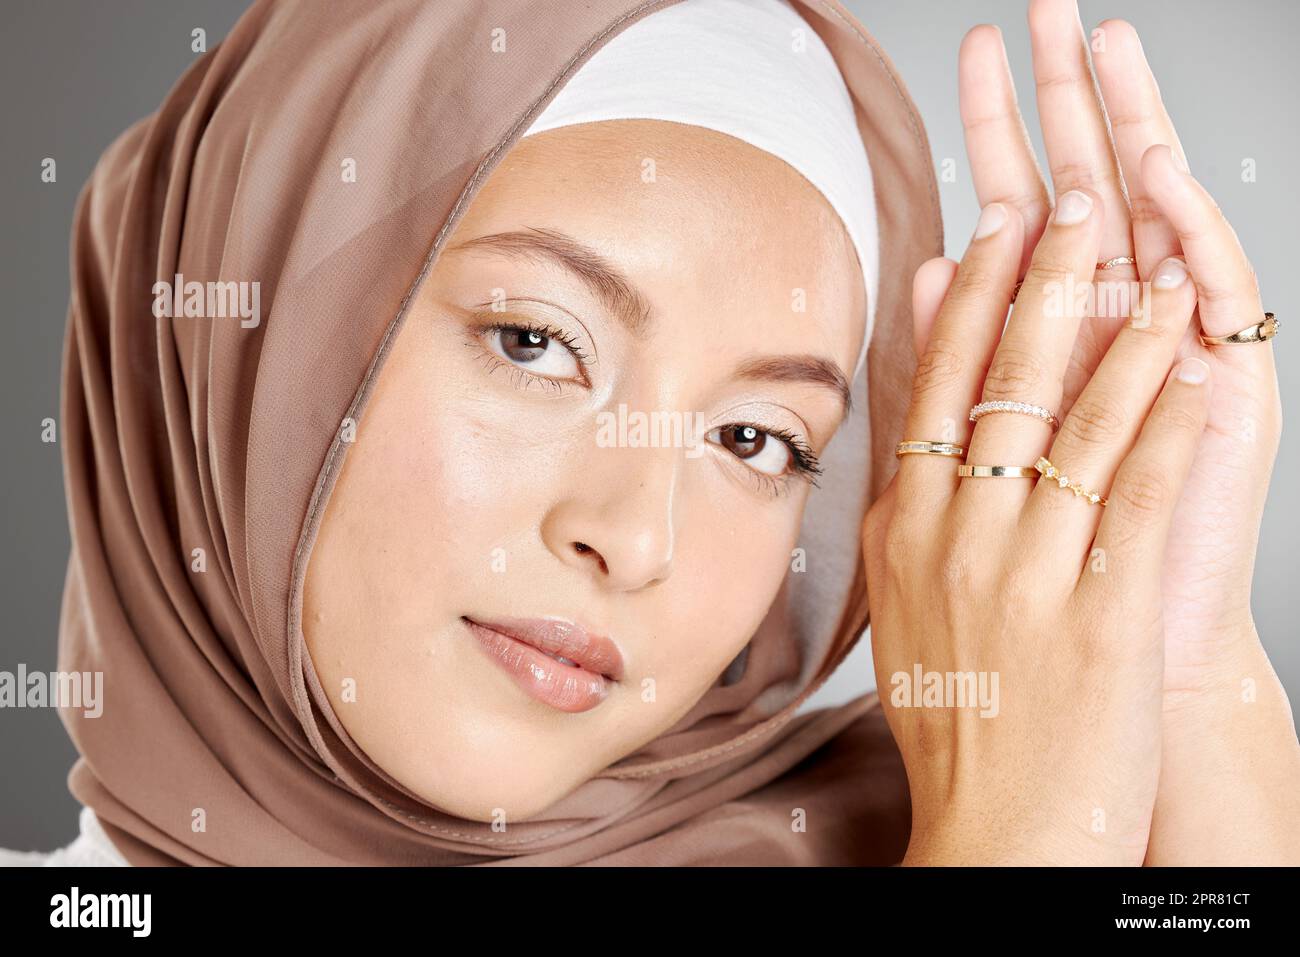 Studio portrait of beautiful muslim woman wearing a brown headscarf and showing multiple rings on her hands. Female wearing hijab and glowing makeup with trendy jewelry showing off her modest beauty Stock Photo